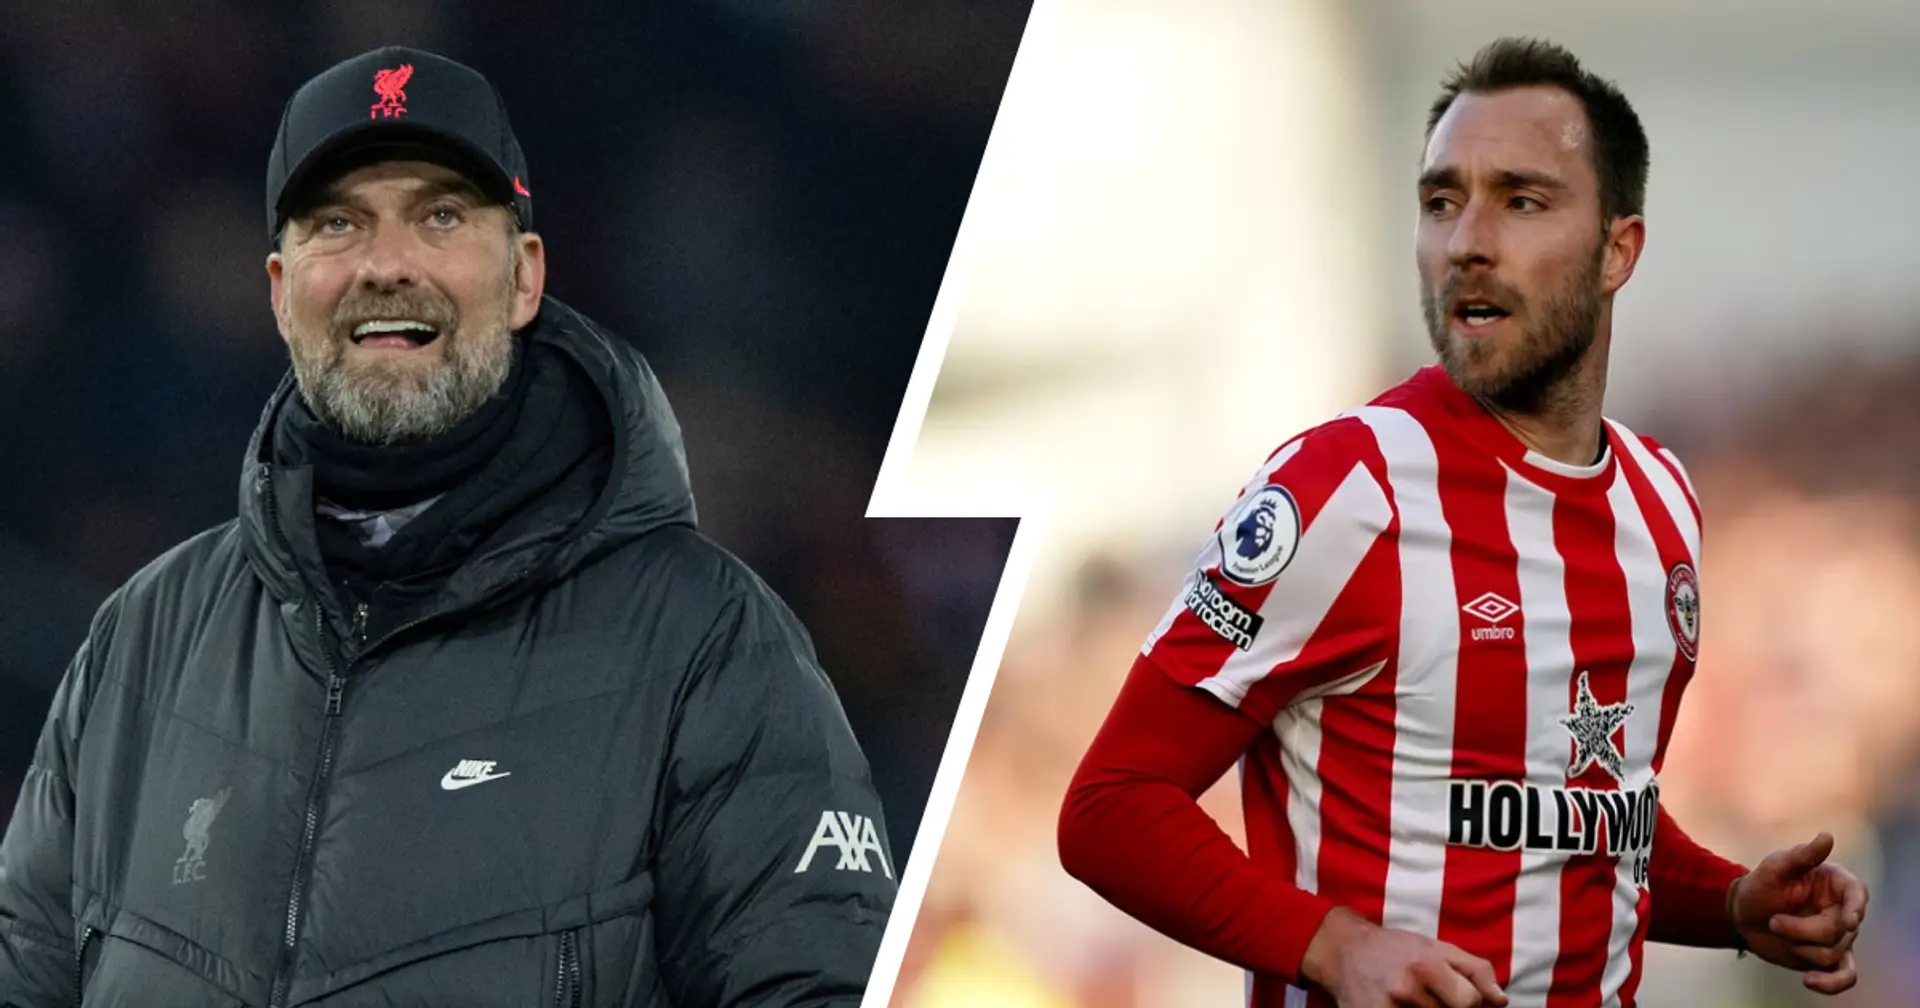 'He's a top player': Liverpool told to rival Man United for Christian Eriksen